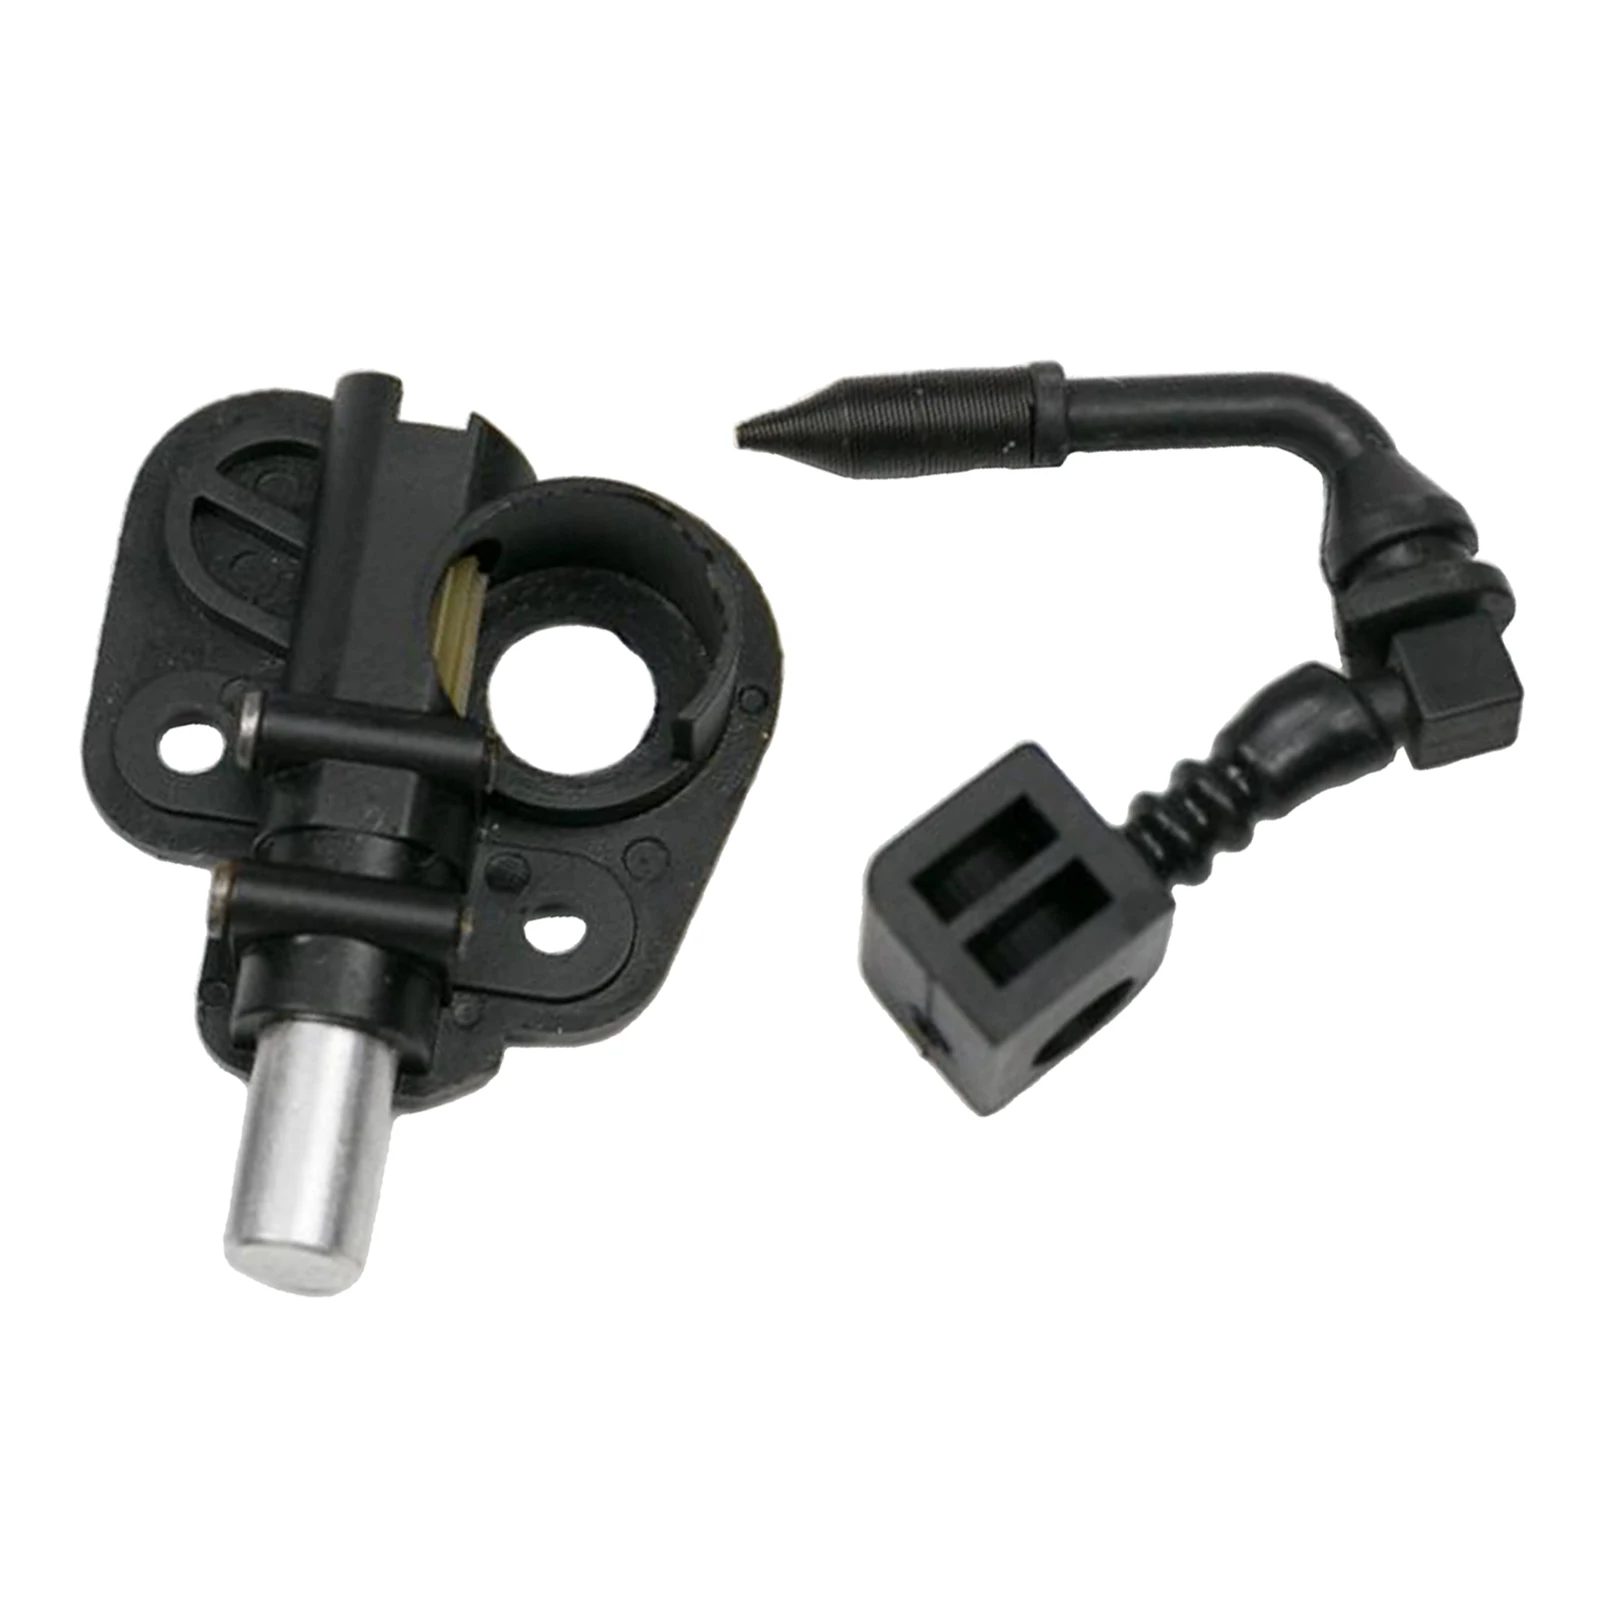 Gas Engine Oil Pump Fit for PARTNER Chainsaw 350 352 390 391 401 420 422, Black, Easy to Install